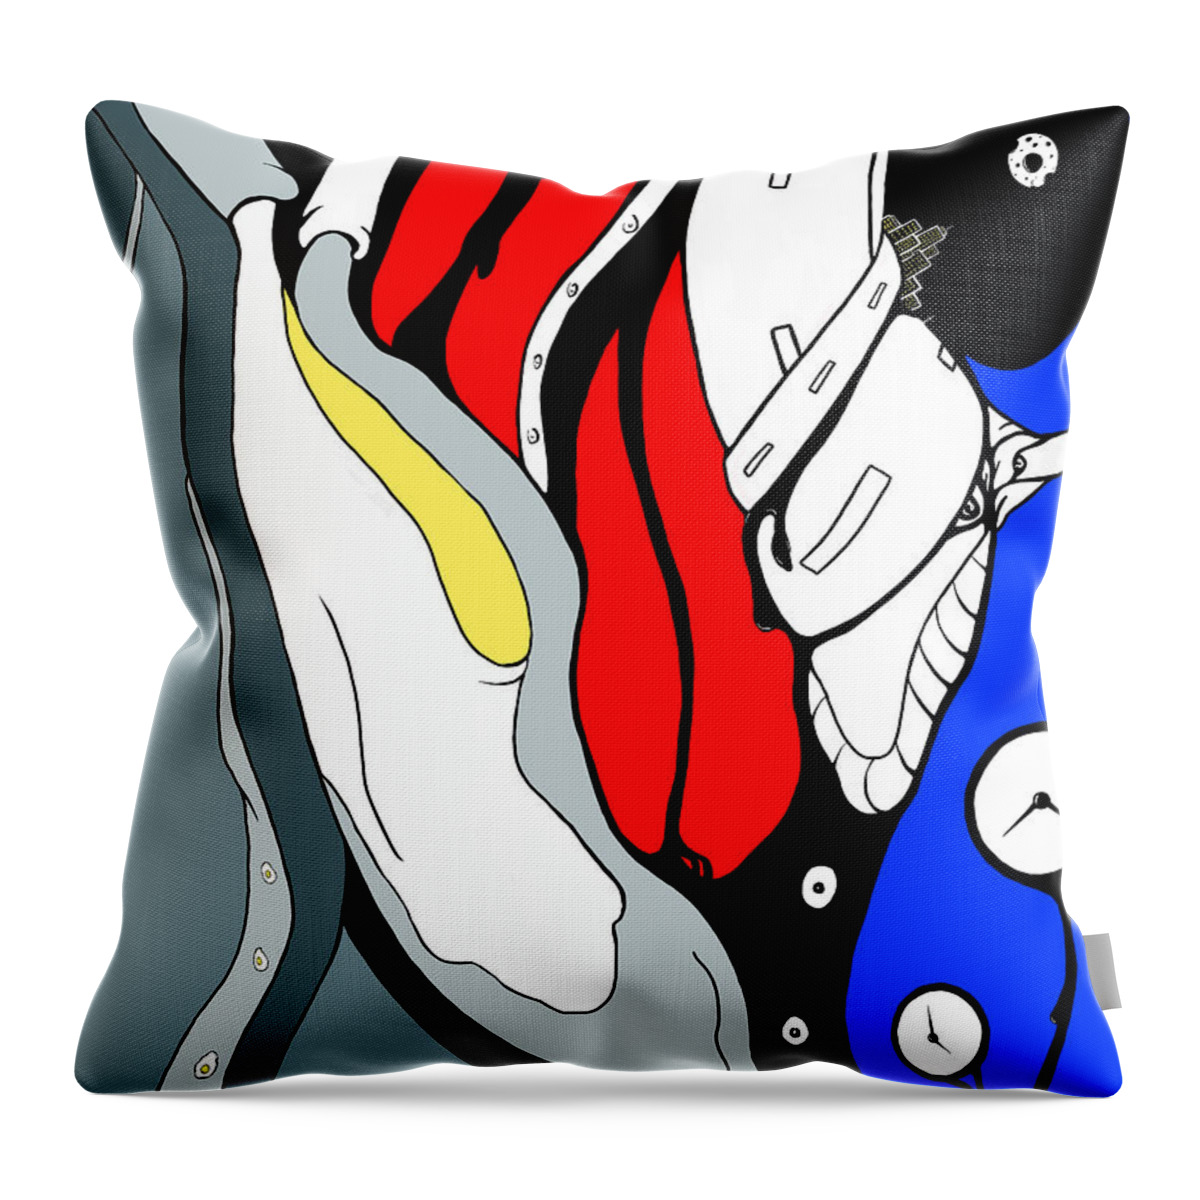 Eggs Throw Pillow featuring the digital art Transition by Craig Tilley